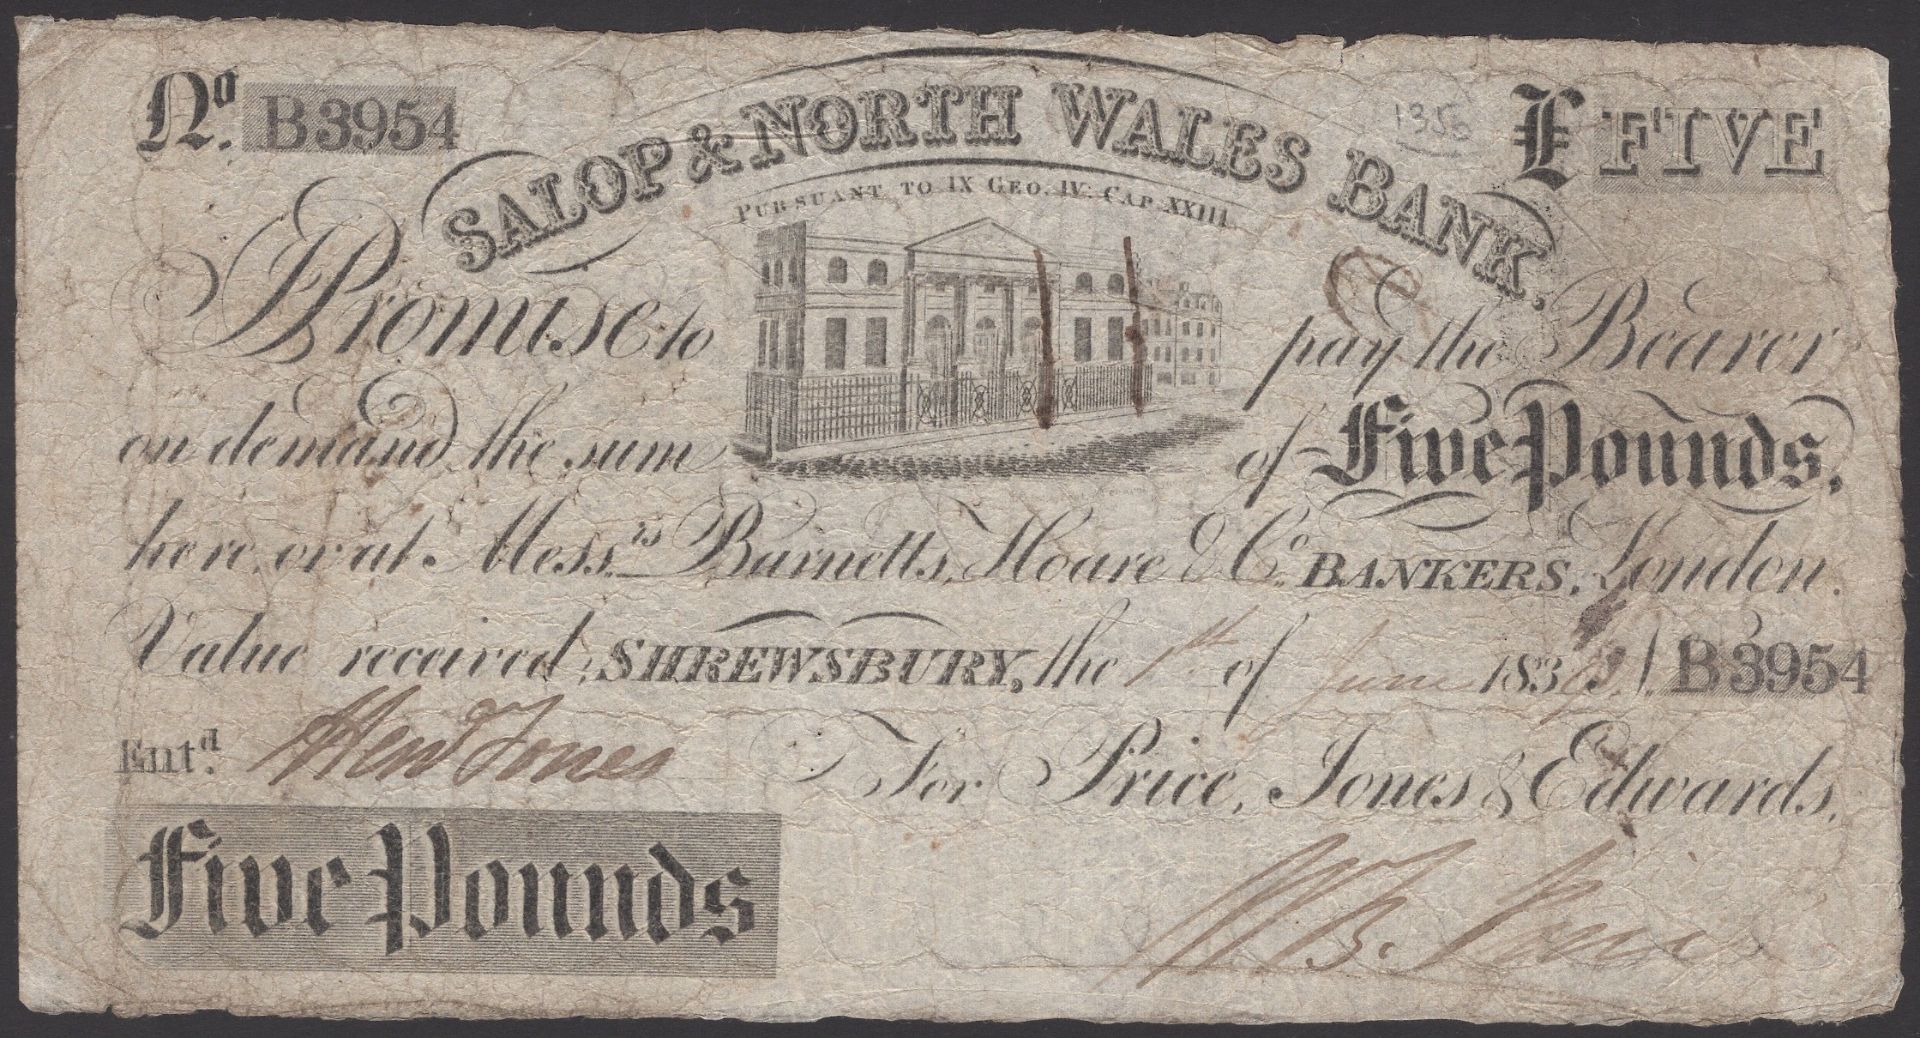 The Ivor Bridges Collection of Provincial Banknotes - Part One